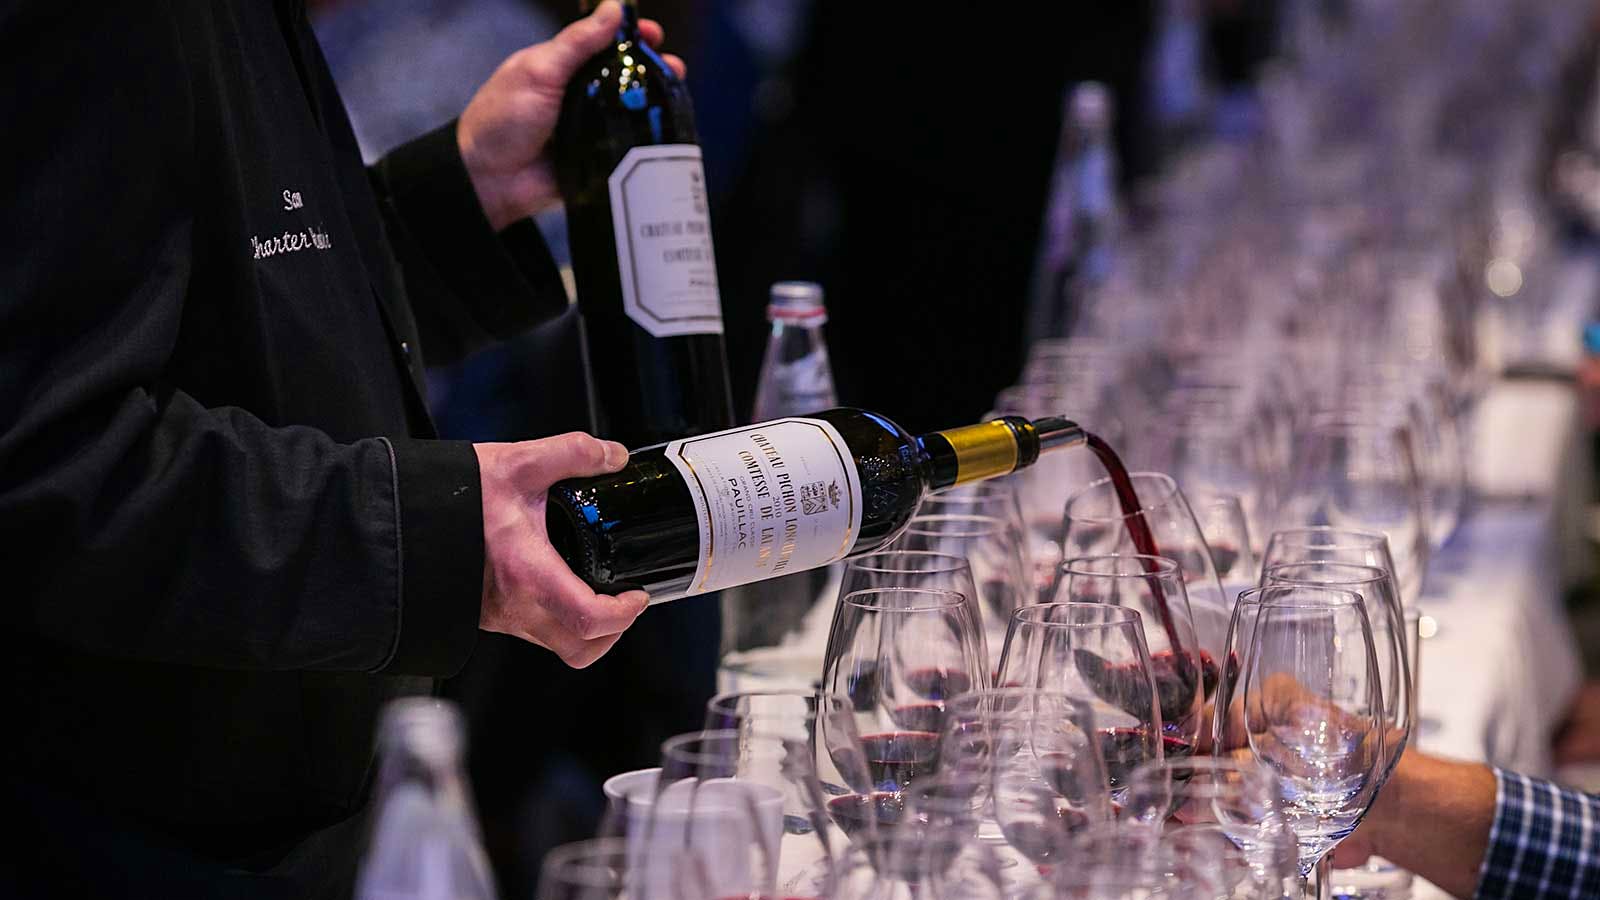 A bottle of Pichon Lalande is poured for a Wine Experience guest